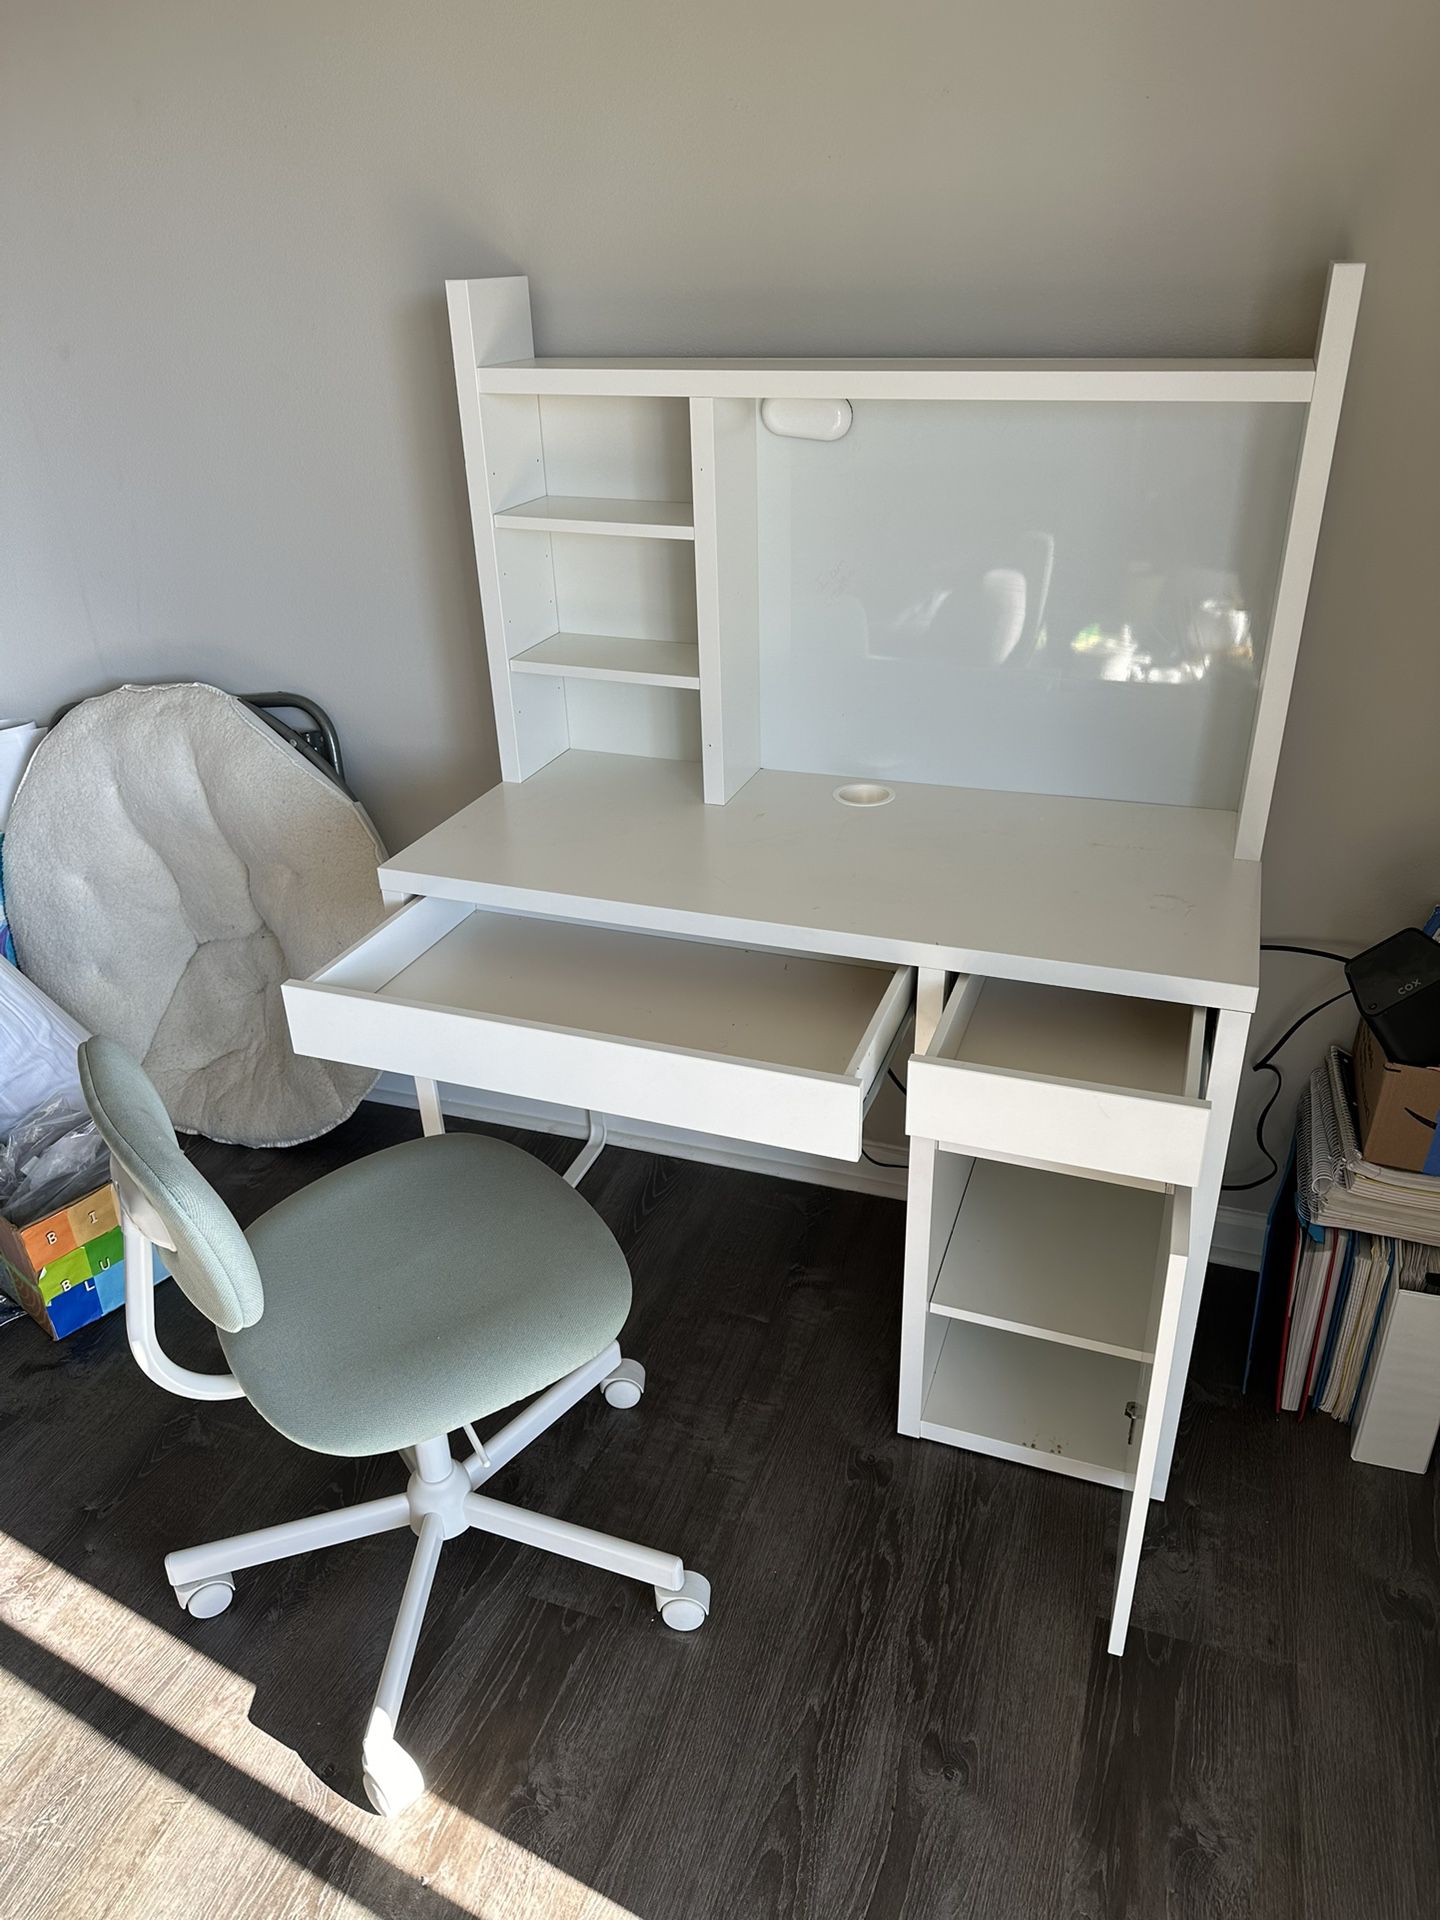 White Desk With Whiteboard And Shelves  (IKEA MICKE & BLECKBERGET)